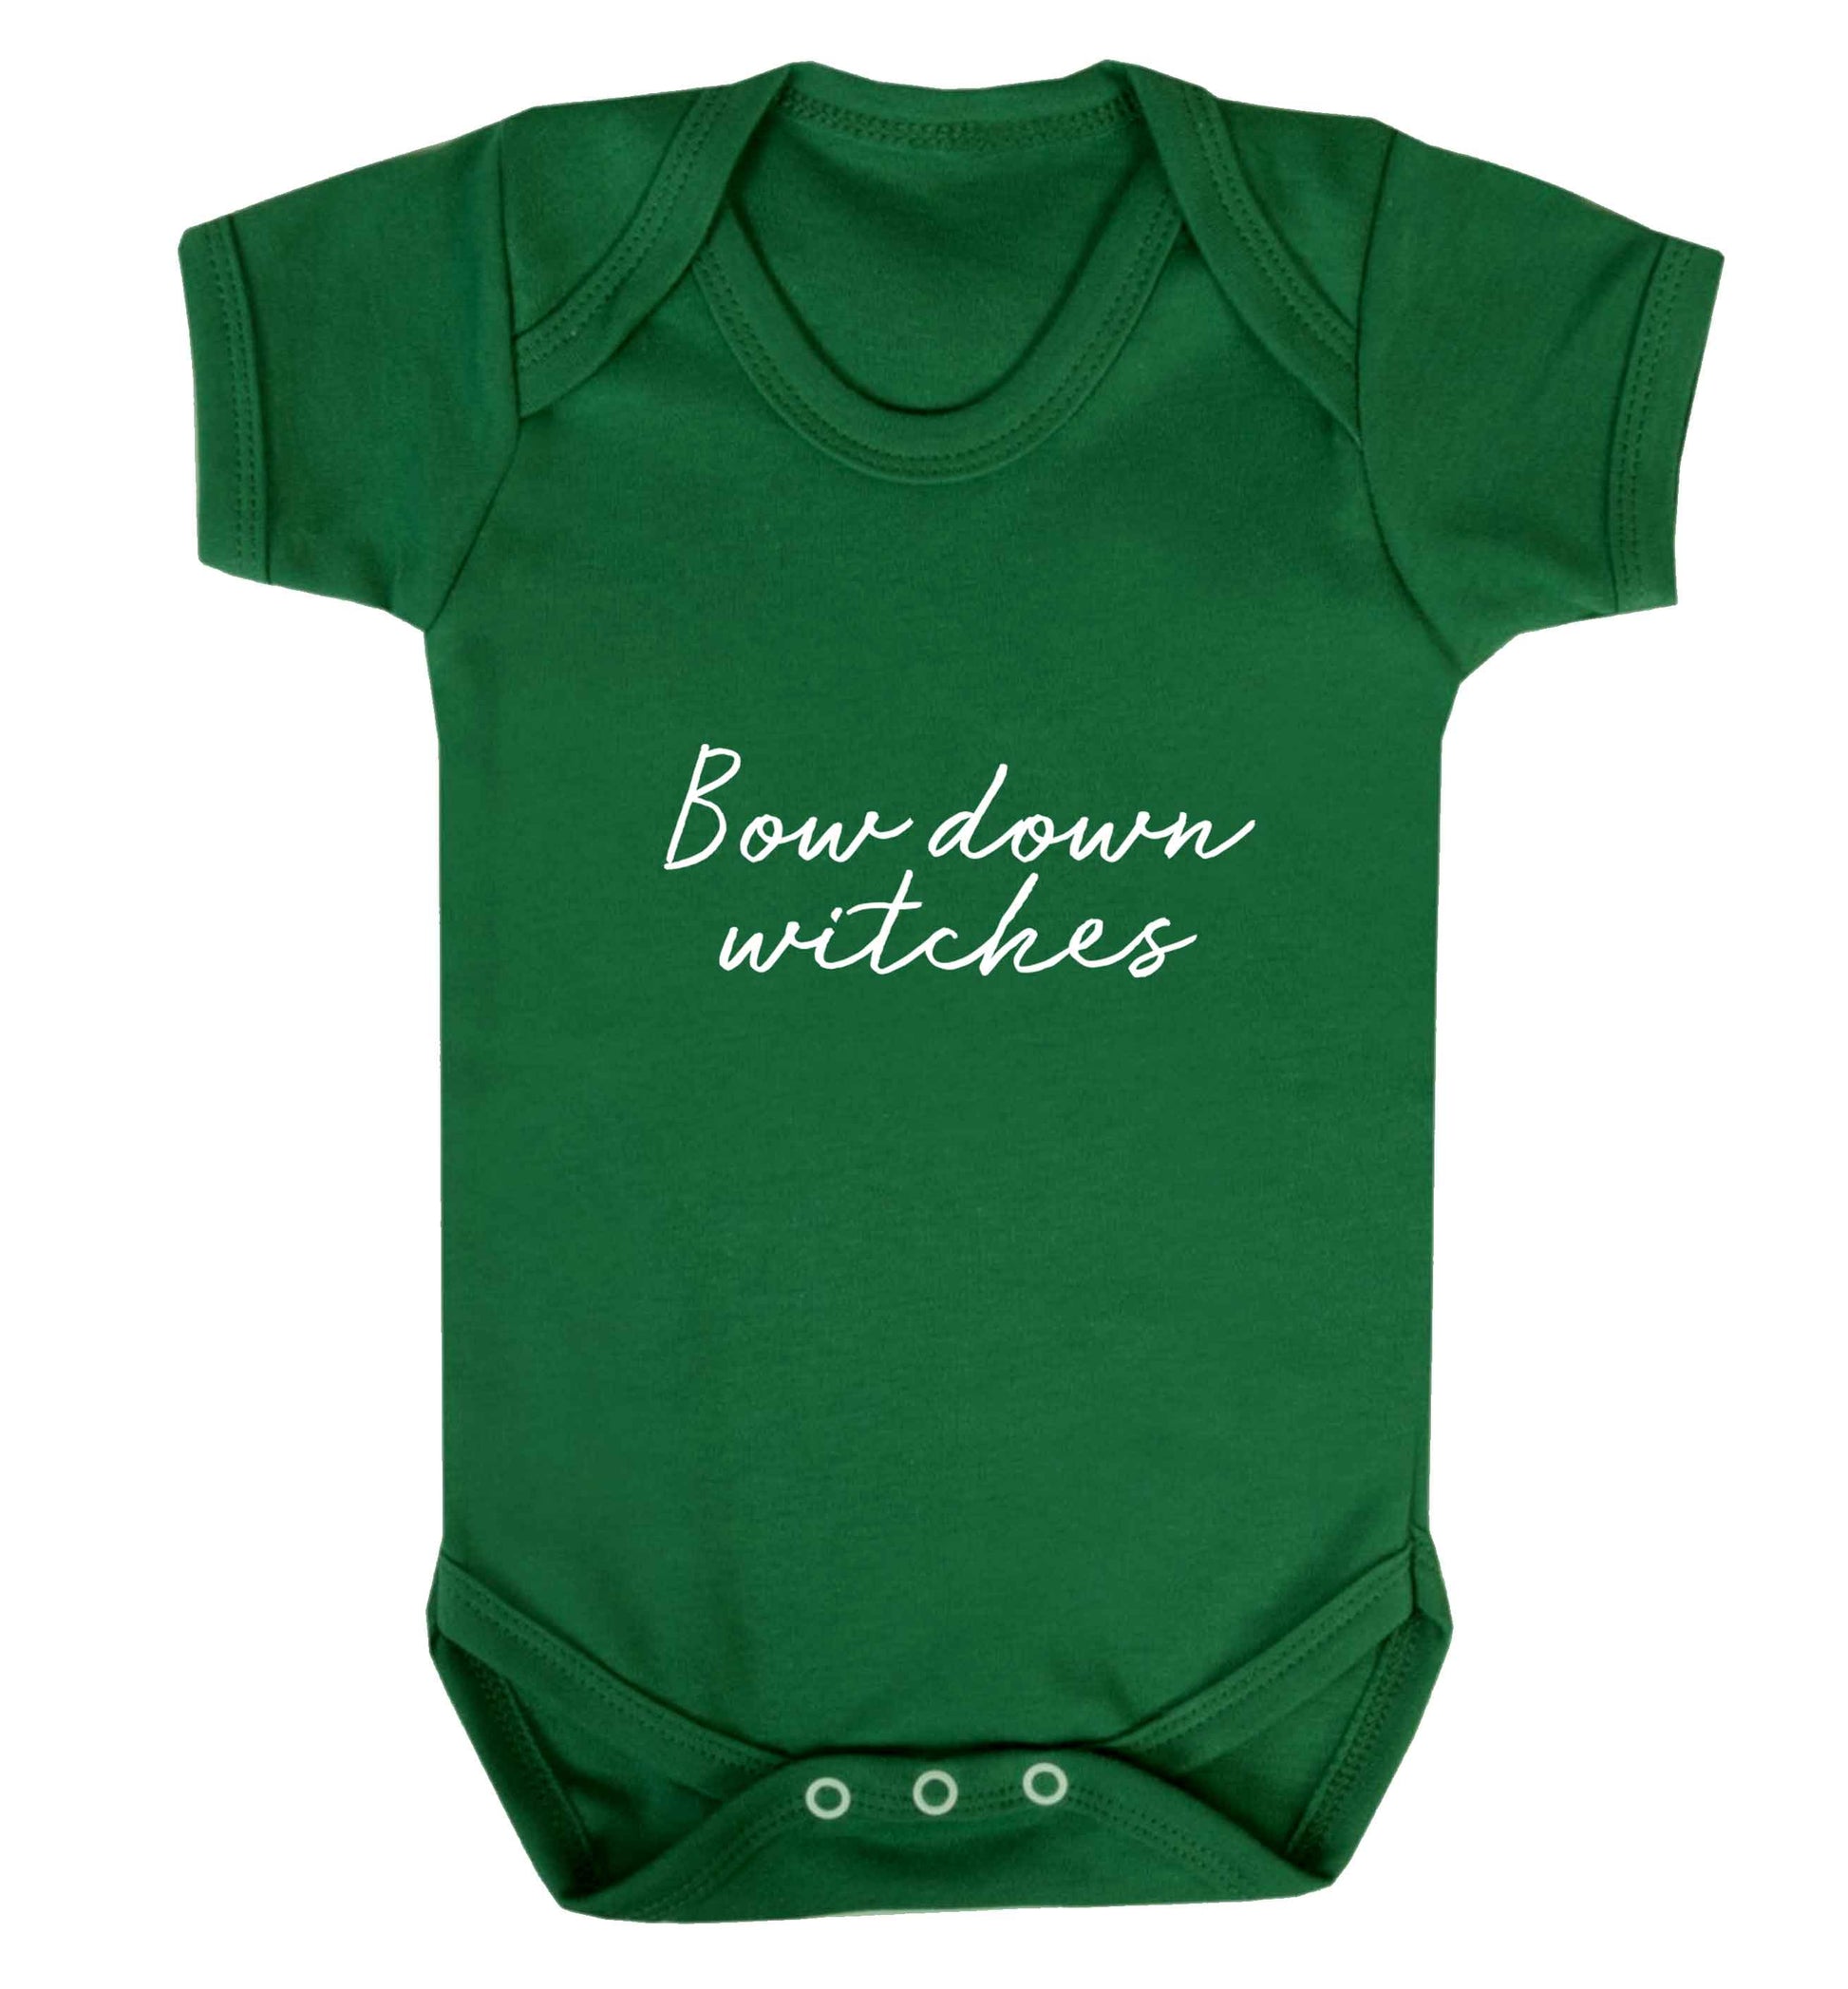 Bow down witches baby vest green 18-24 months